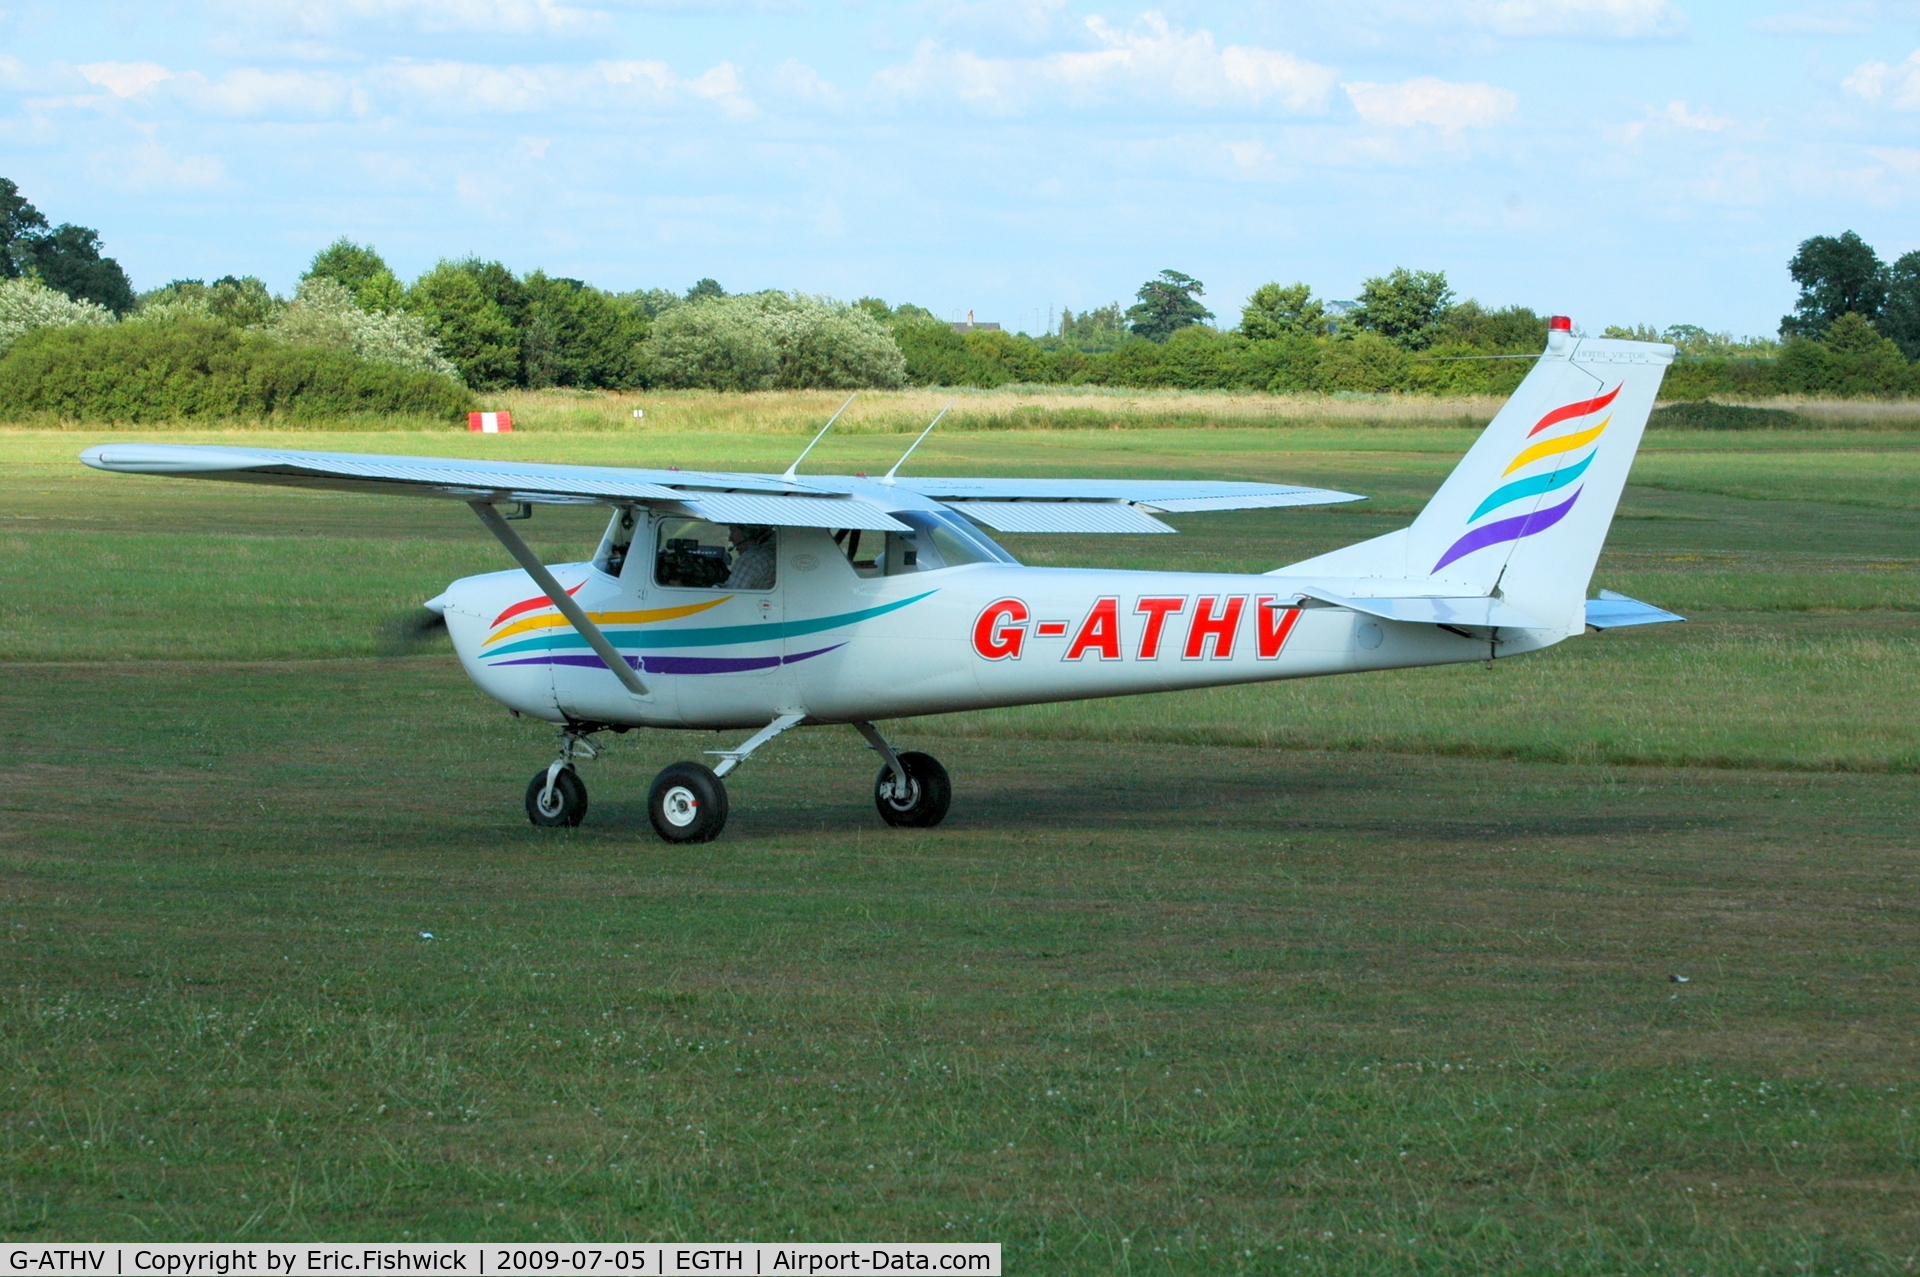 G-ATHV, 1966 Cessna 150F C/N 150-62019, G-ATHV at Shuttleworth Military Pagent air Display July 09